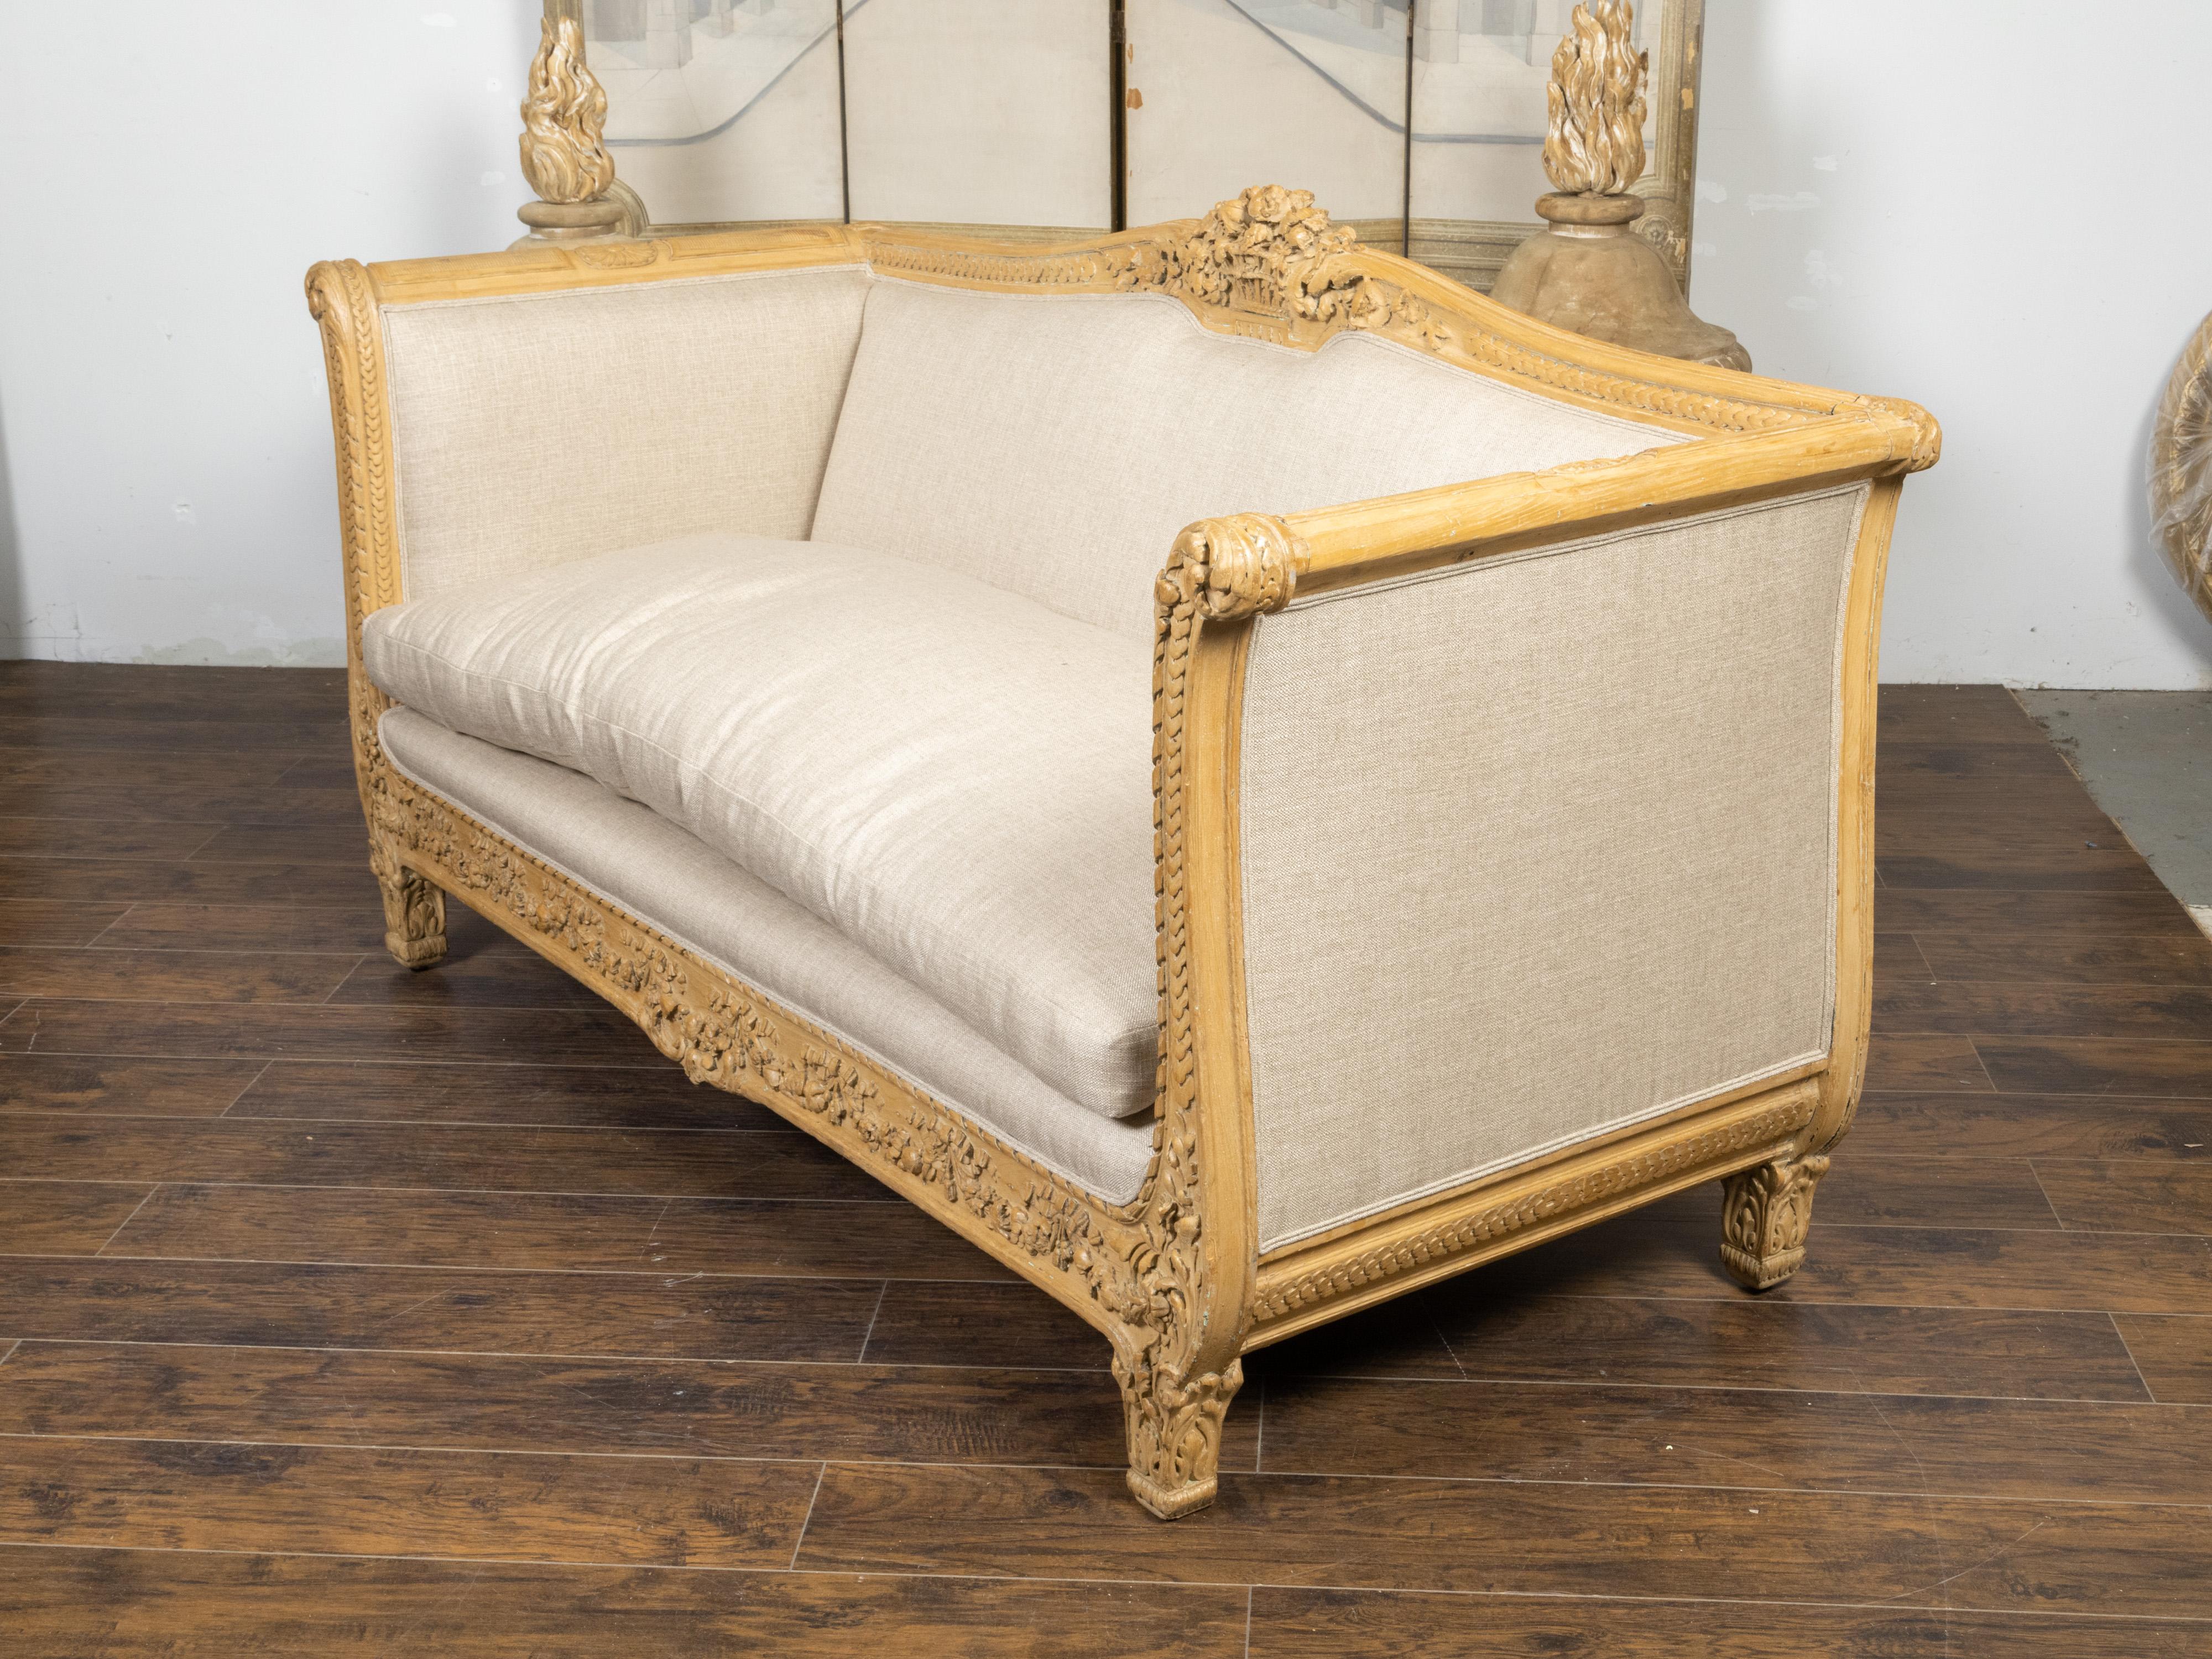 Hand-Carved French 19th Century Canapé with Richly Carved Décor and New Upholstery For Sale